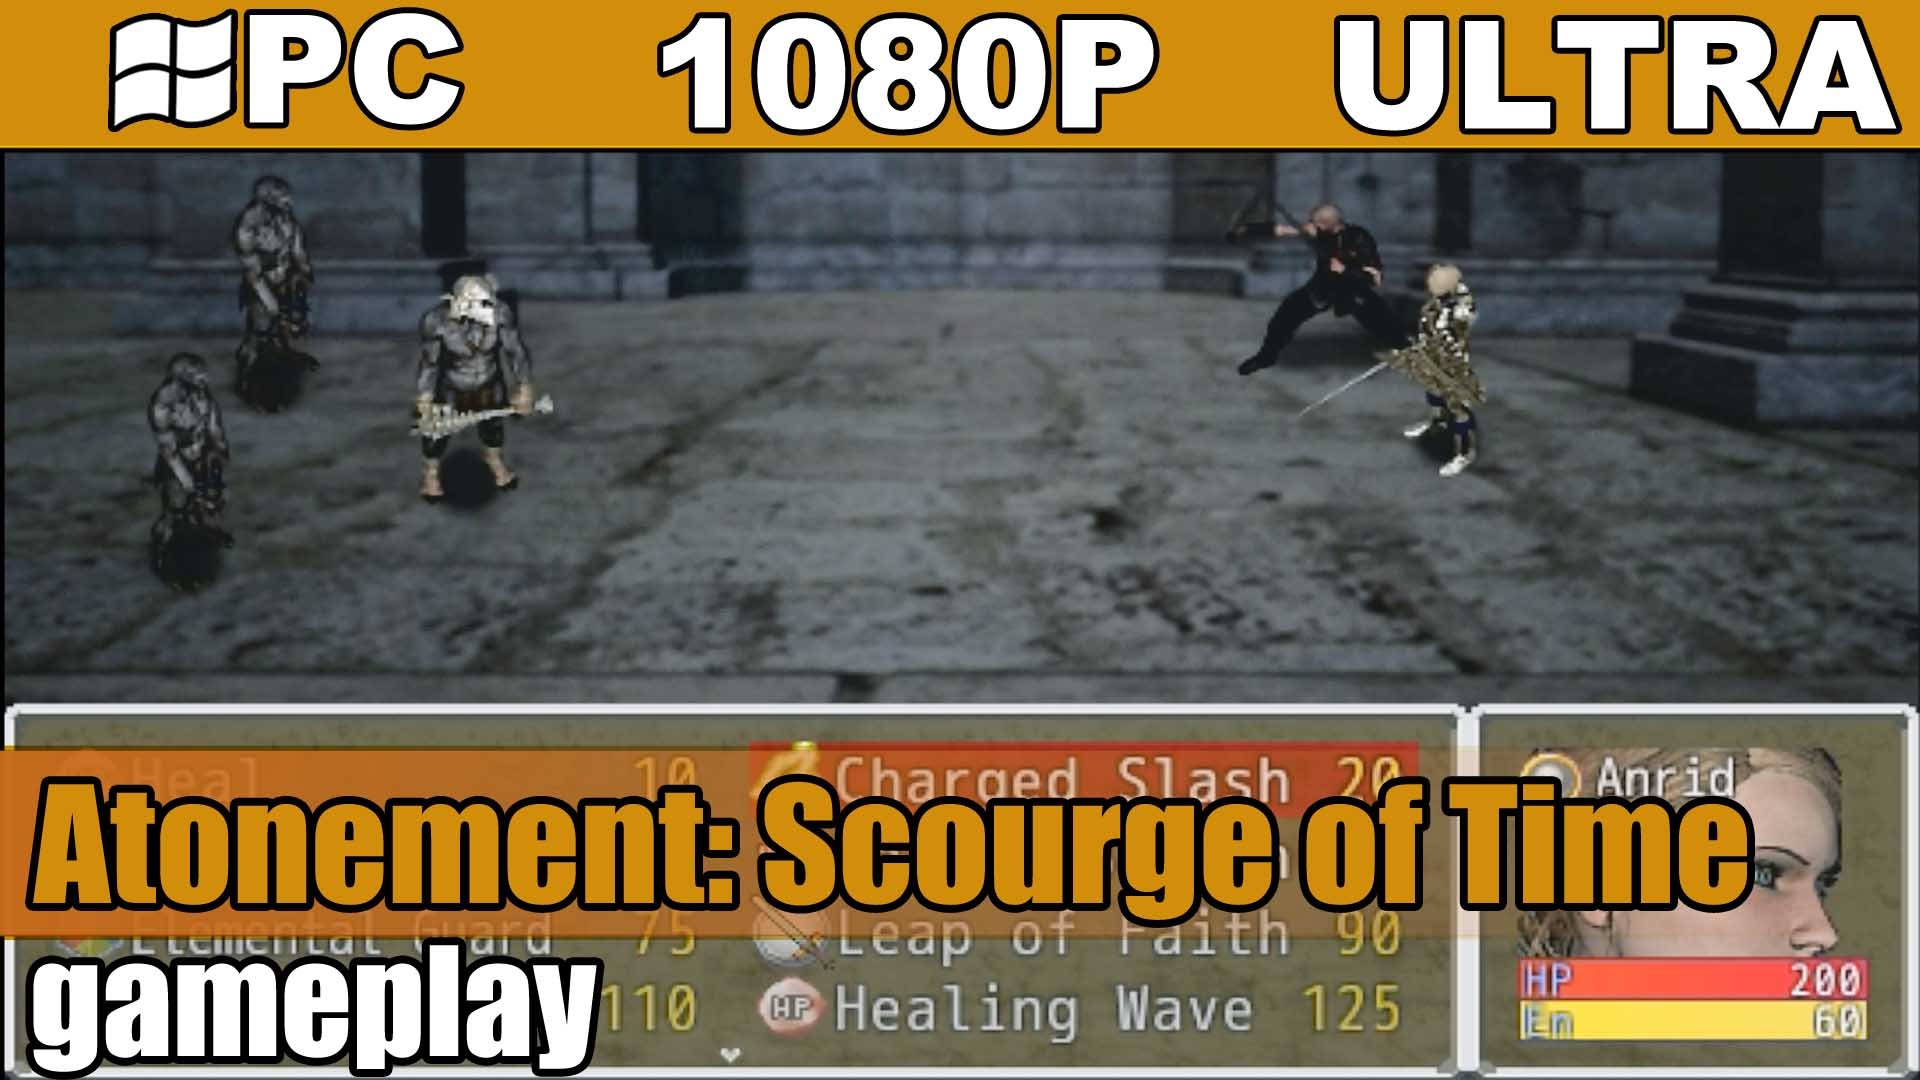 Atonement: Scourge Of Time #19